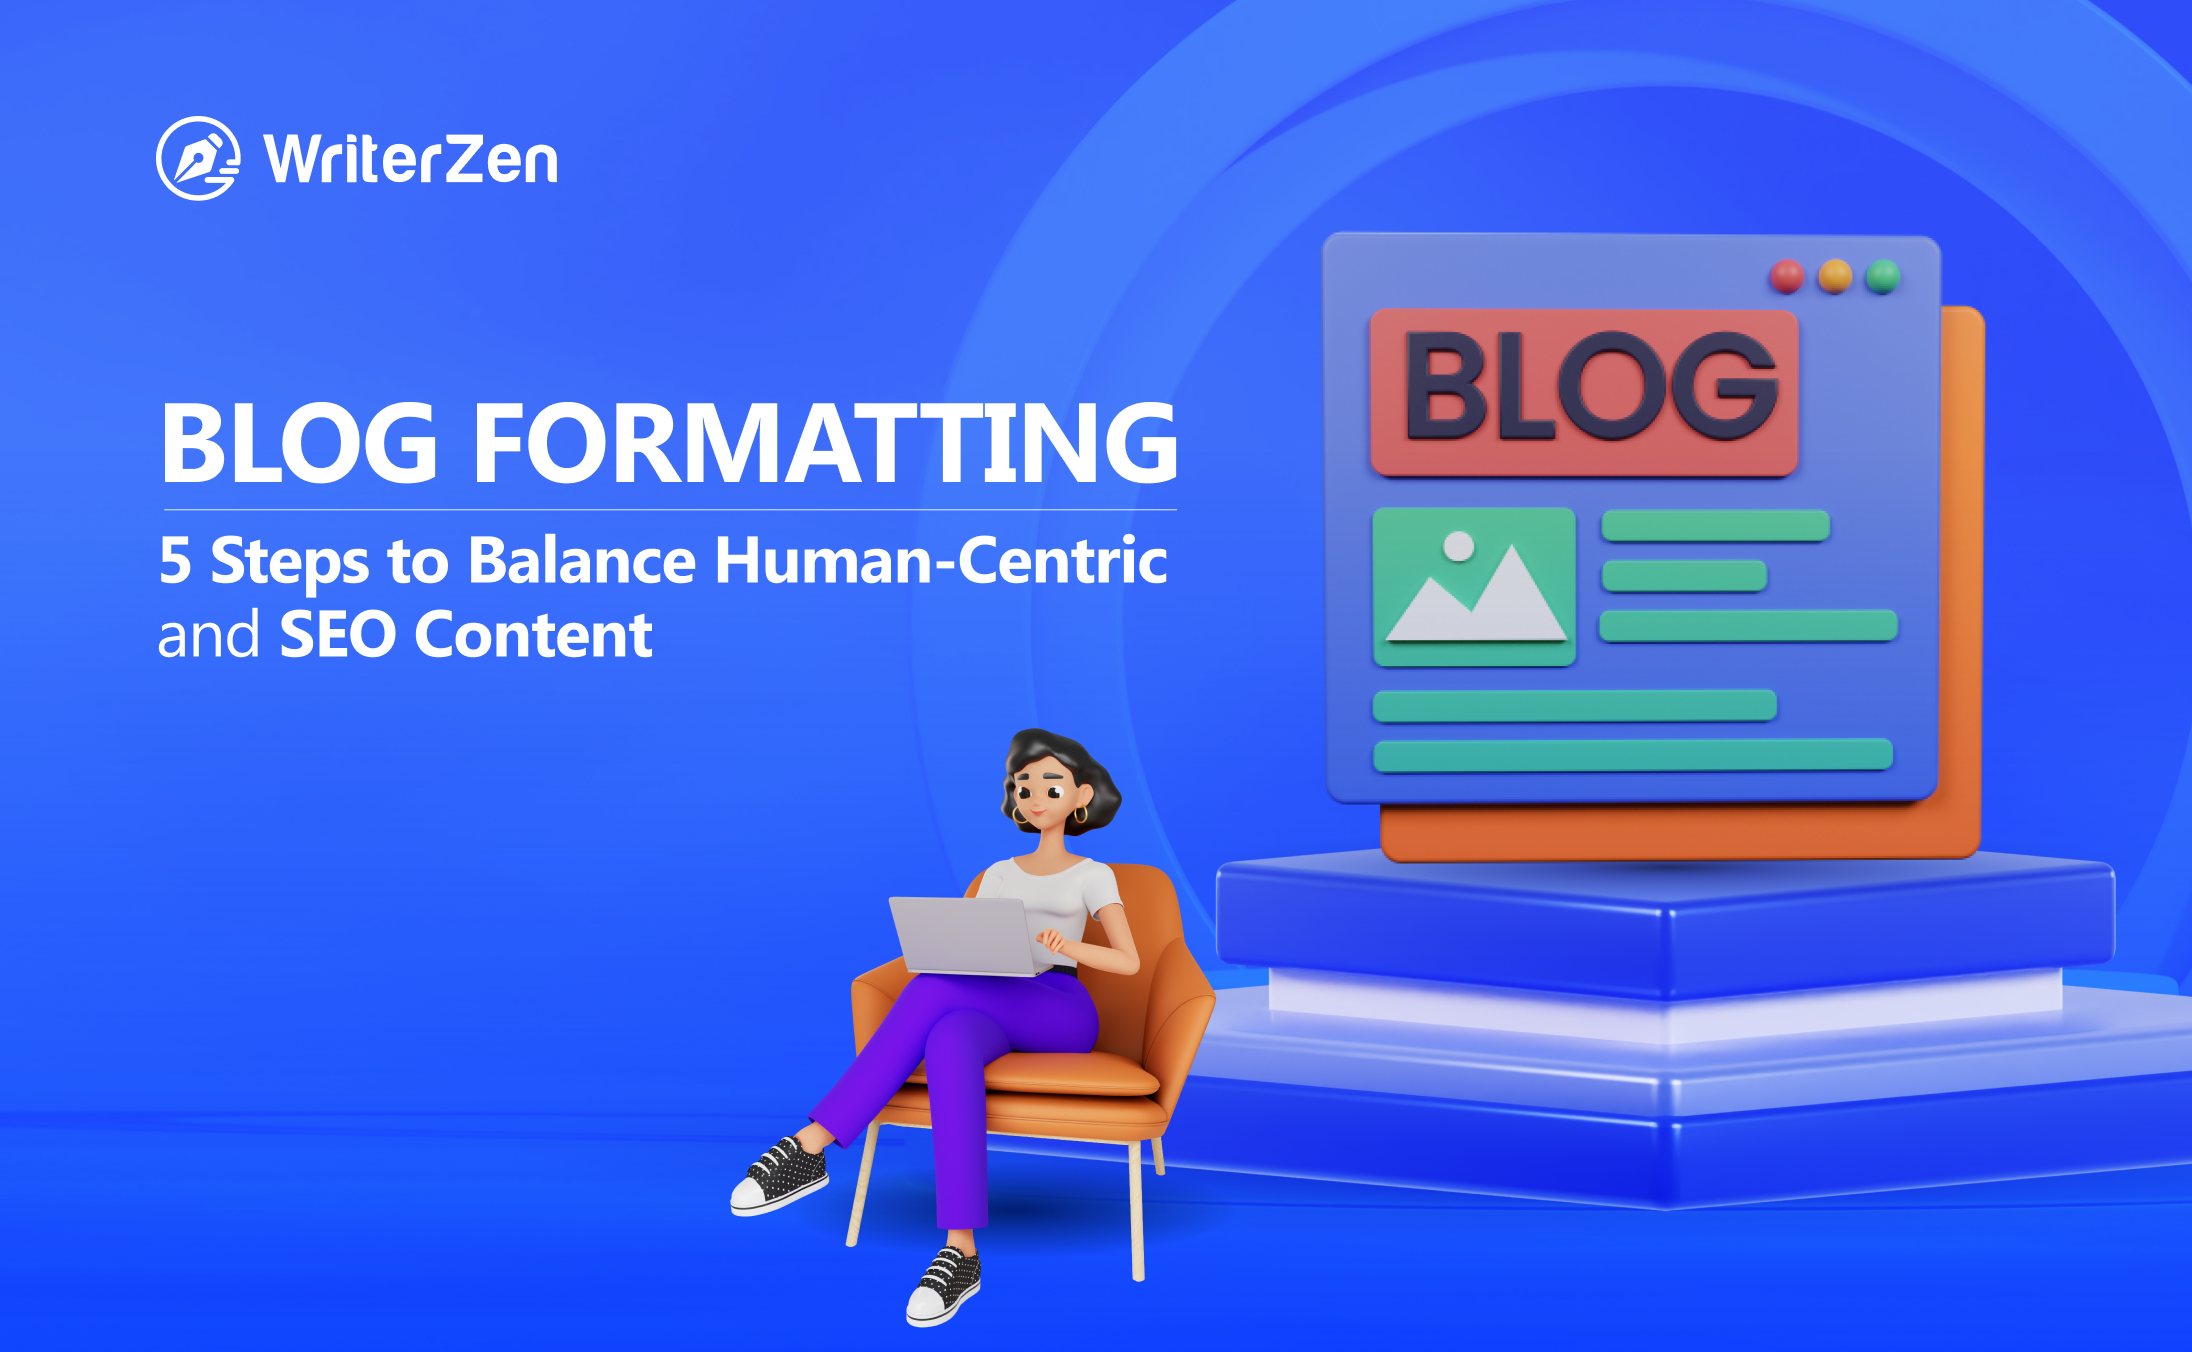 Blog Formatting: 5 Steps to Balance Human-Centric and SEO Content